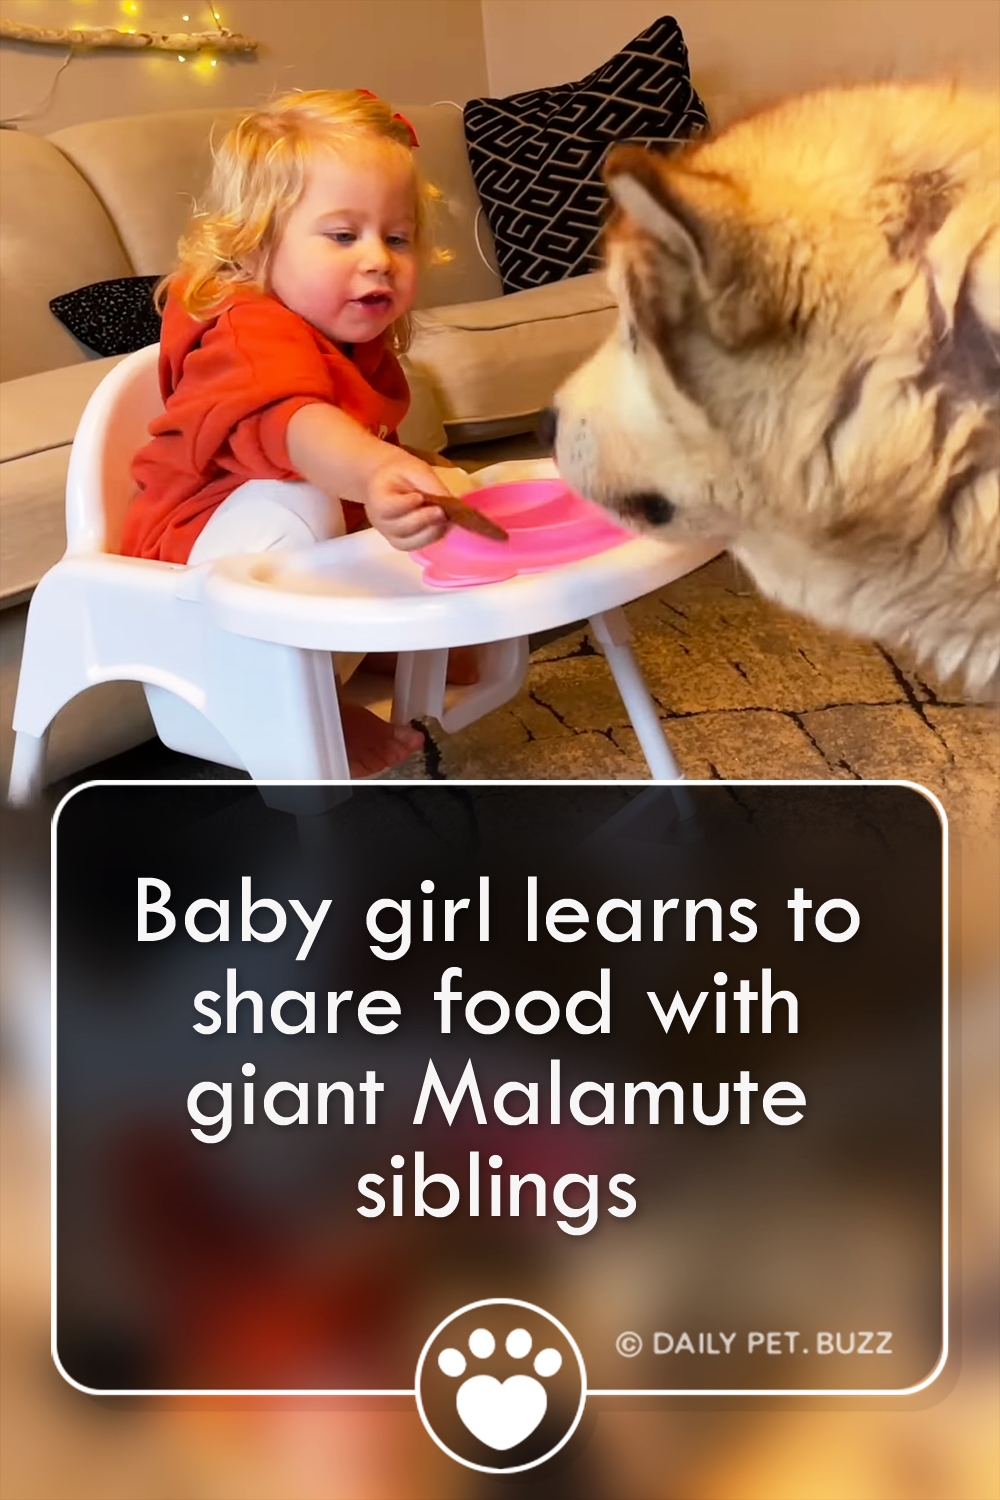 Baby girl learns to share food with giant Malamute siblings